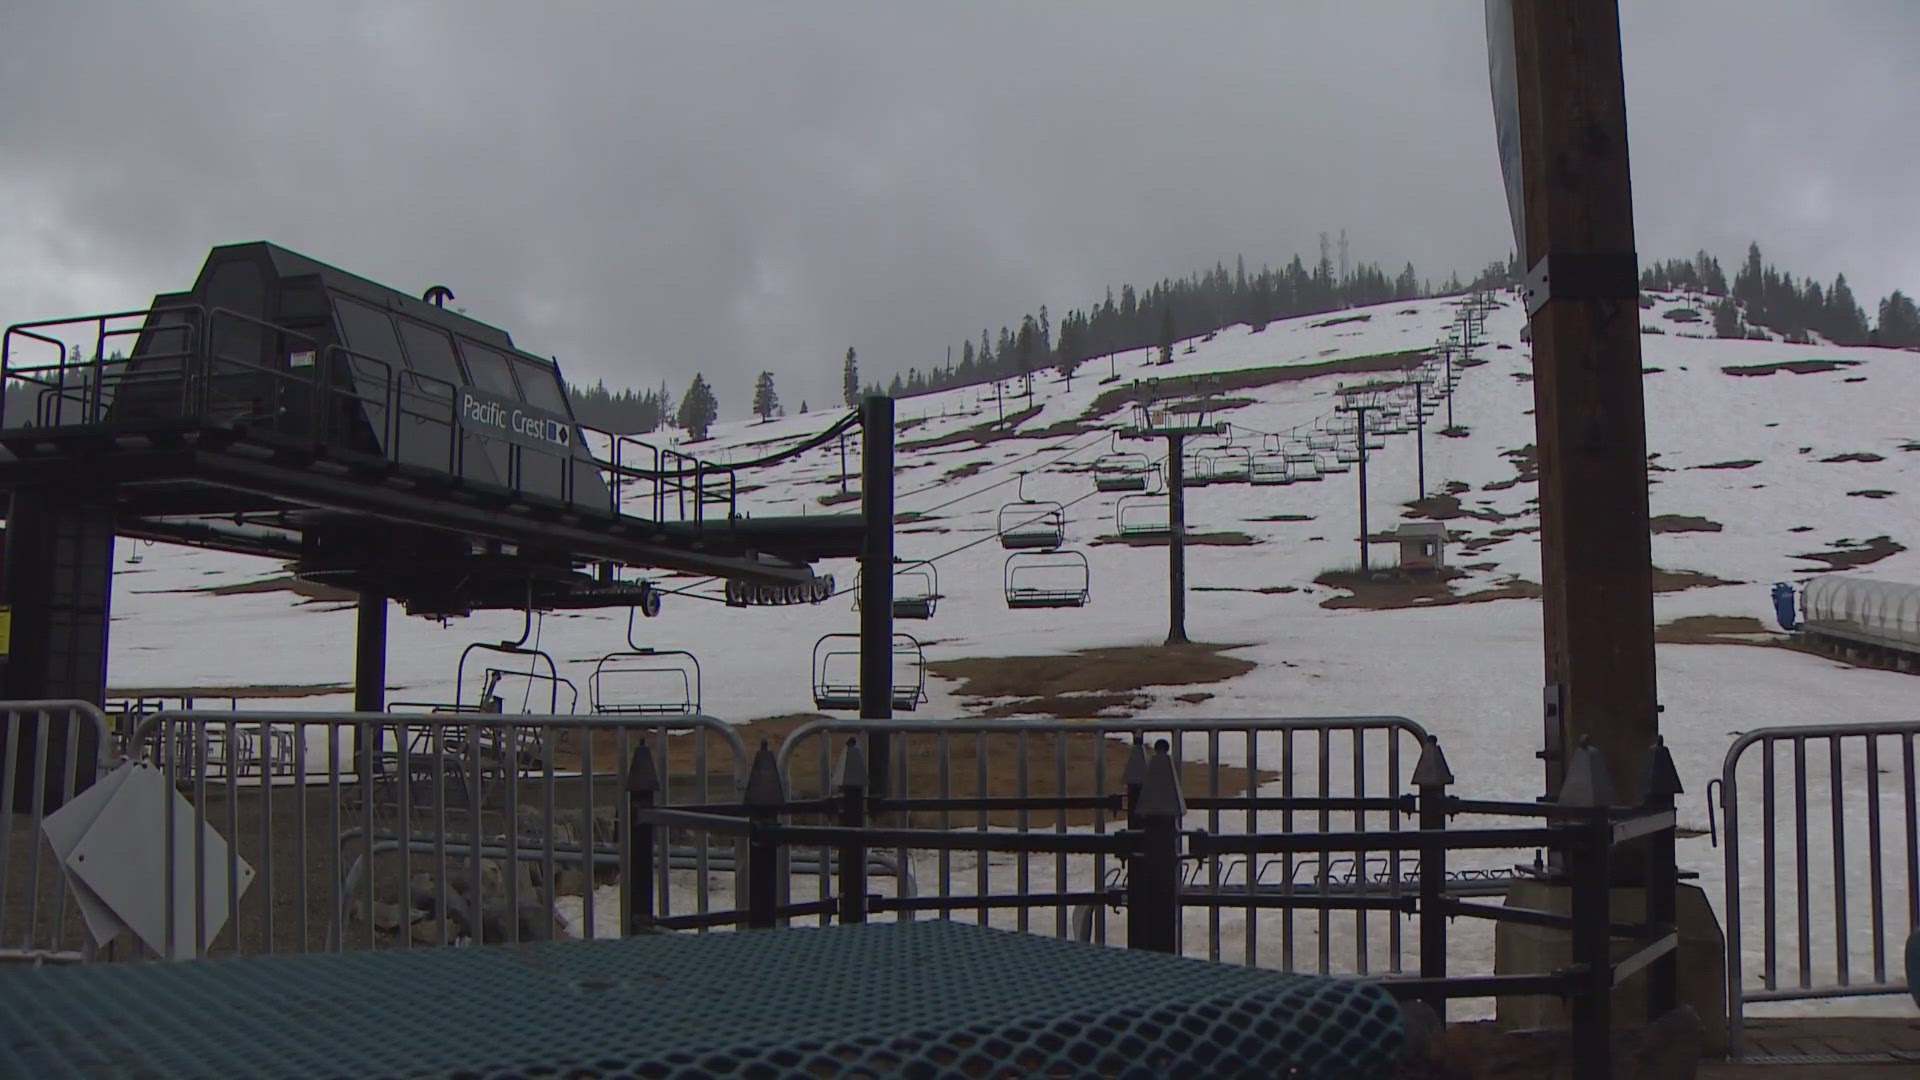 Both the Summit at Snoqualmie and Stevens Pass Ski Resort said they received the least amount of snowfall in years